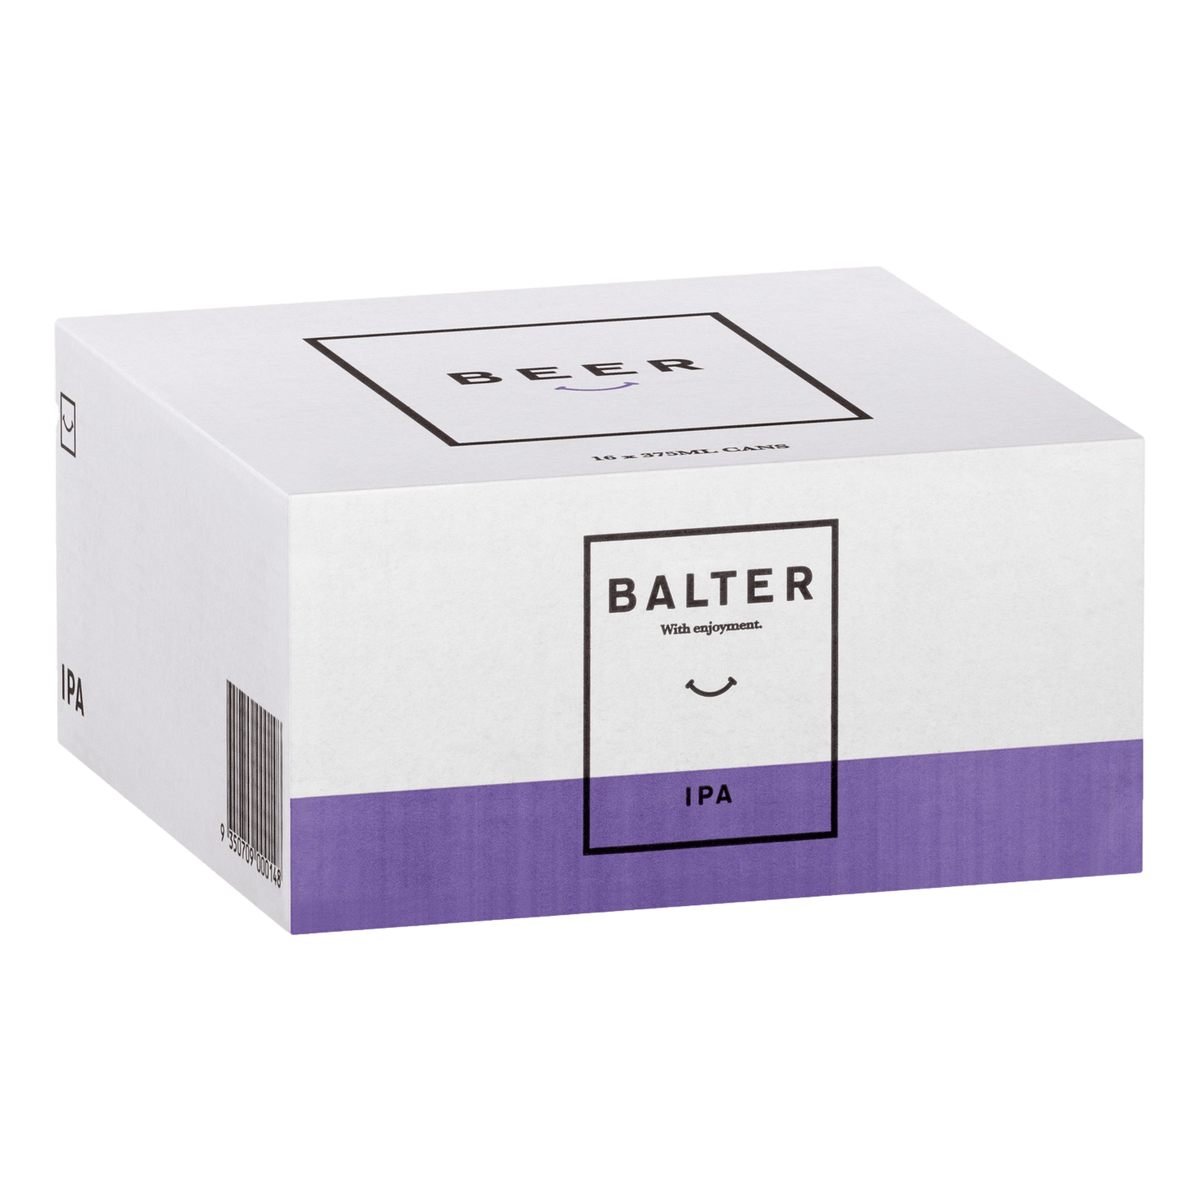 Balter IPA 375ml Can Case of 16